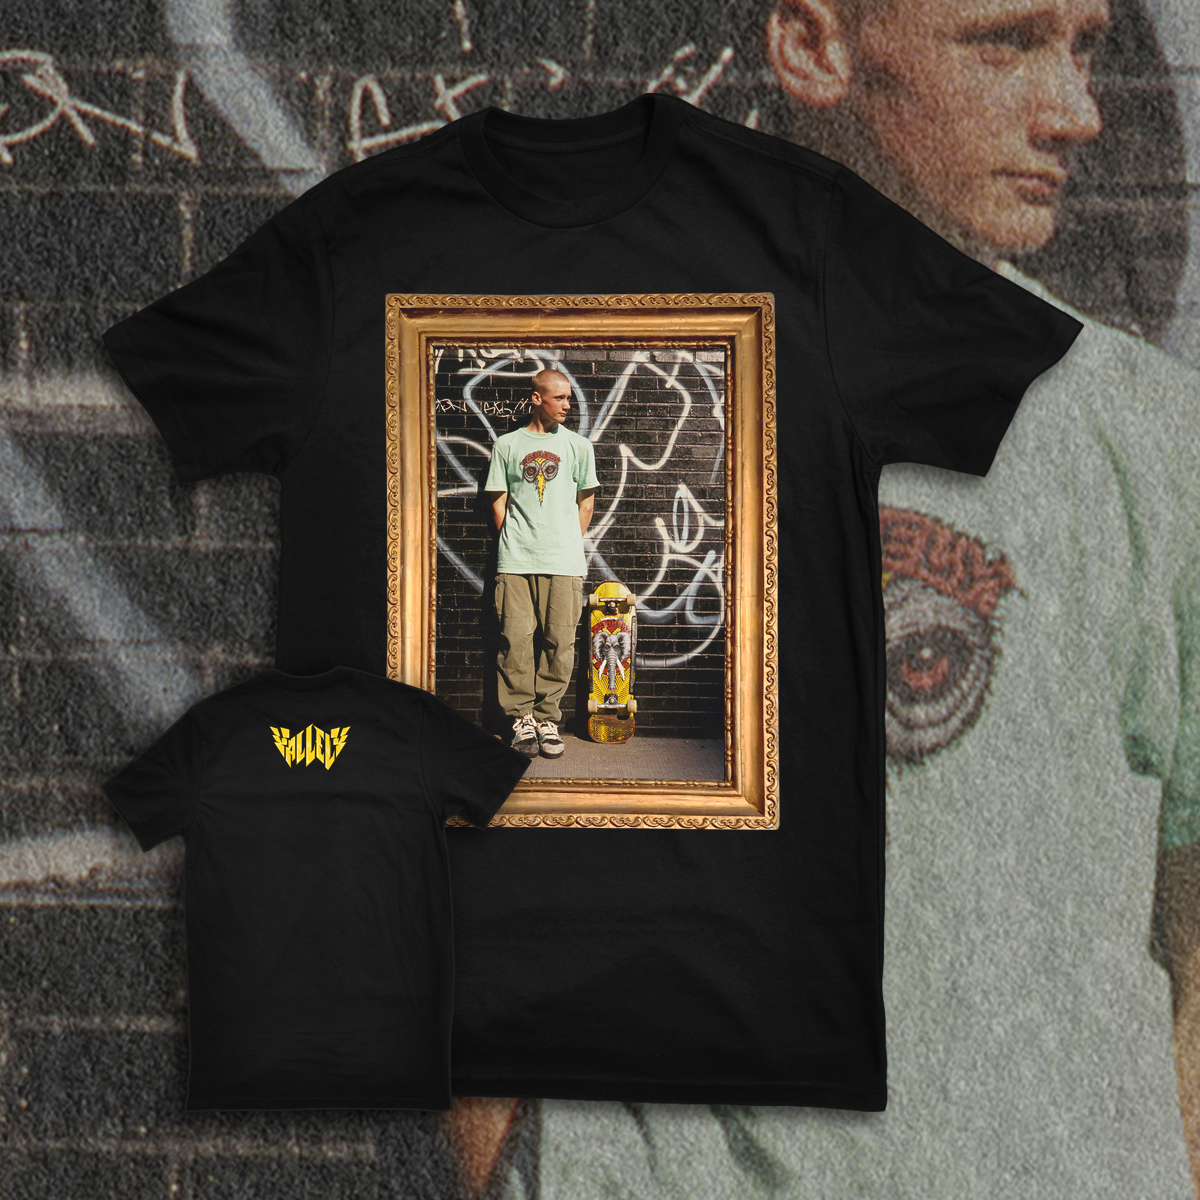 MIKE VALLELY "NYC" SHIRT